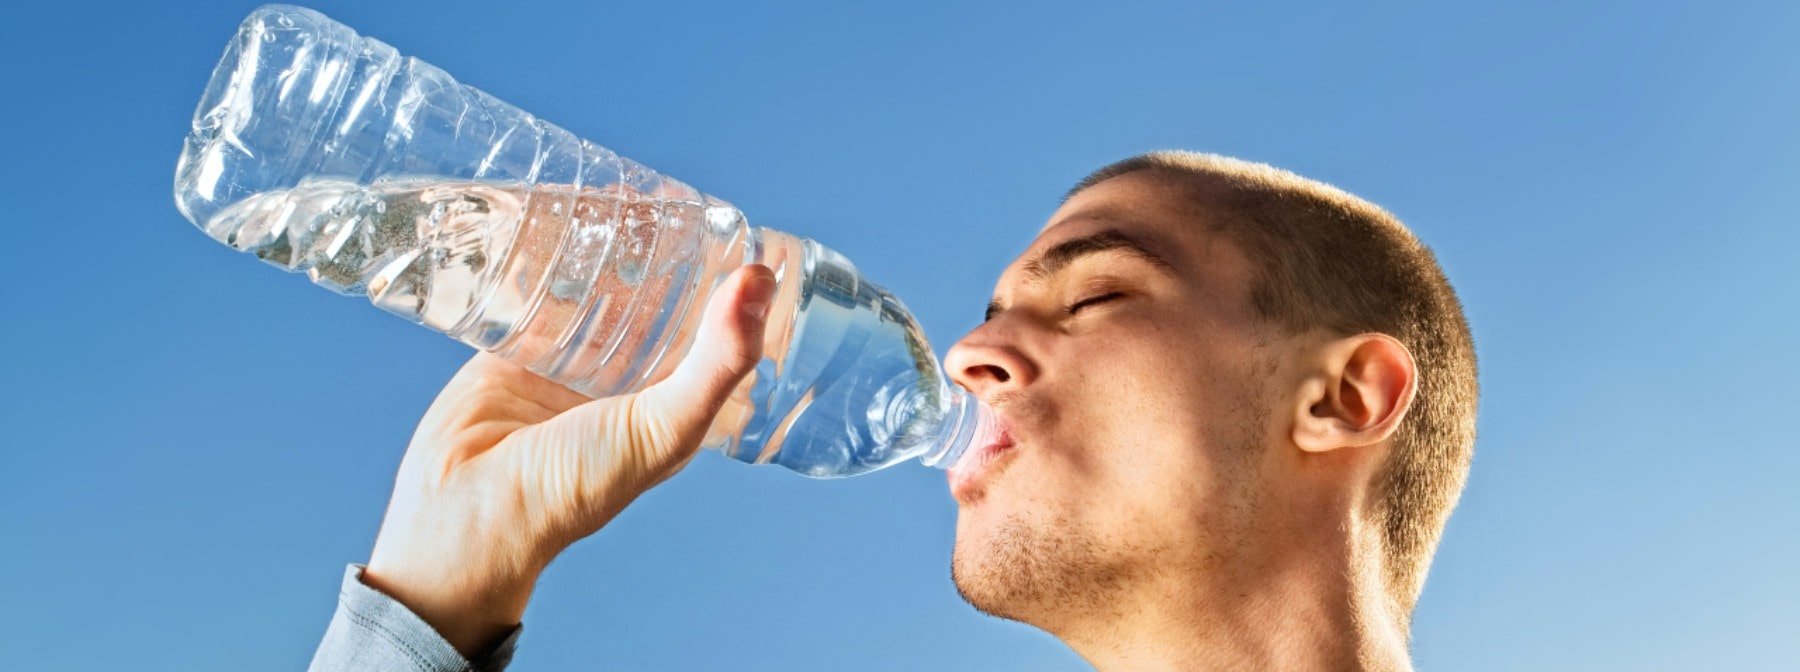 Is Water Fasting Safe For You? How It Works, Benefits And Risks